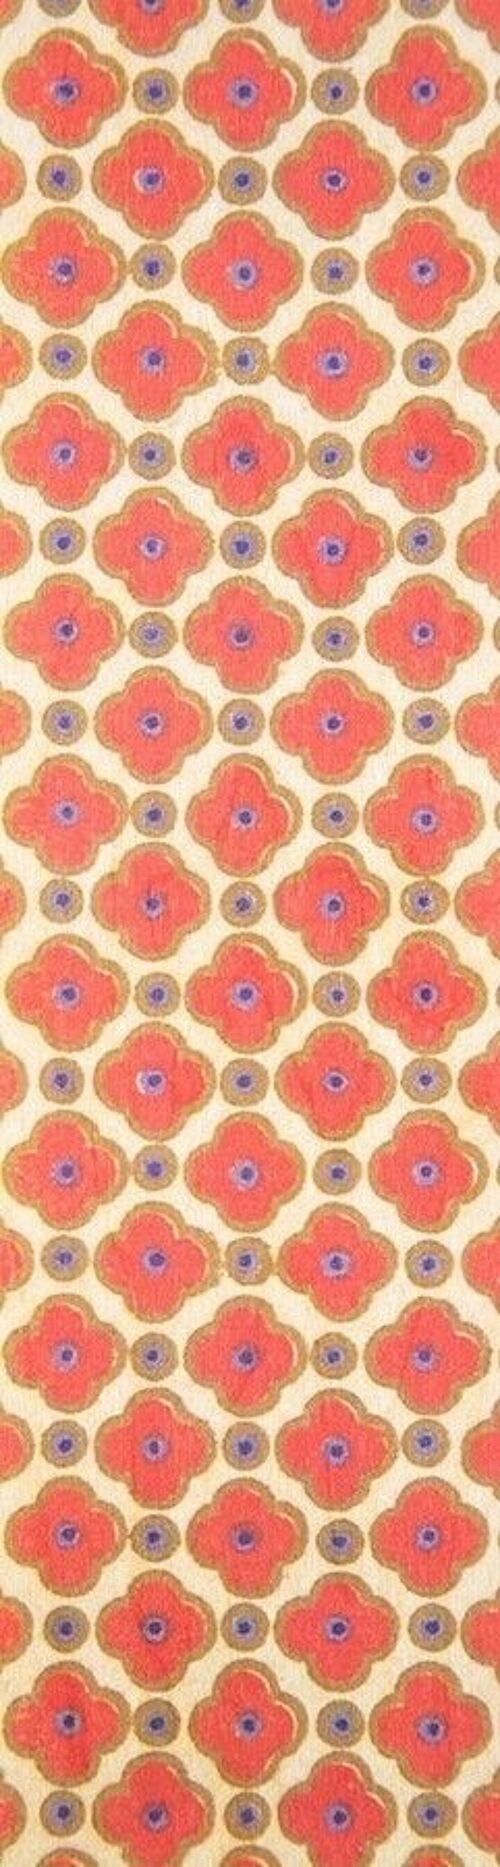 Marque-pages en bois- patterns red flowers